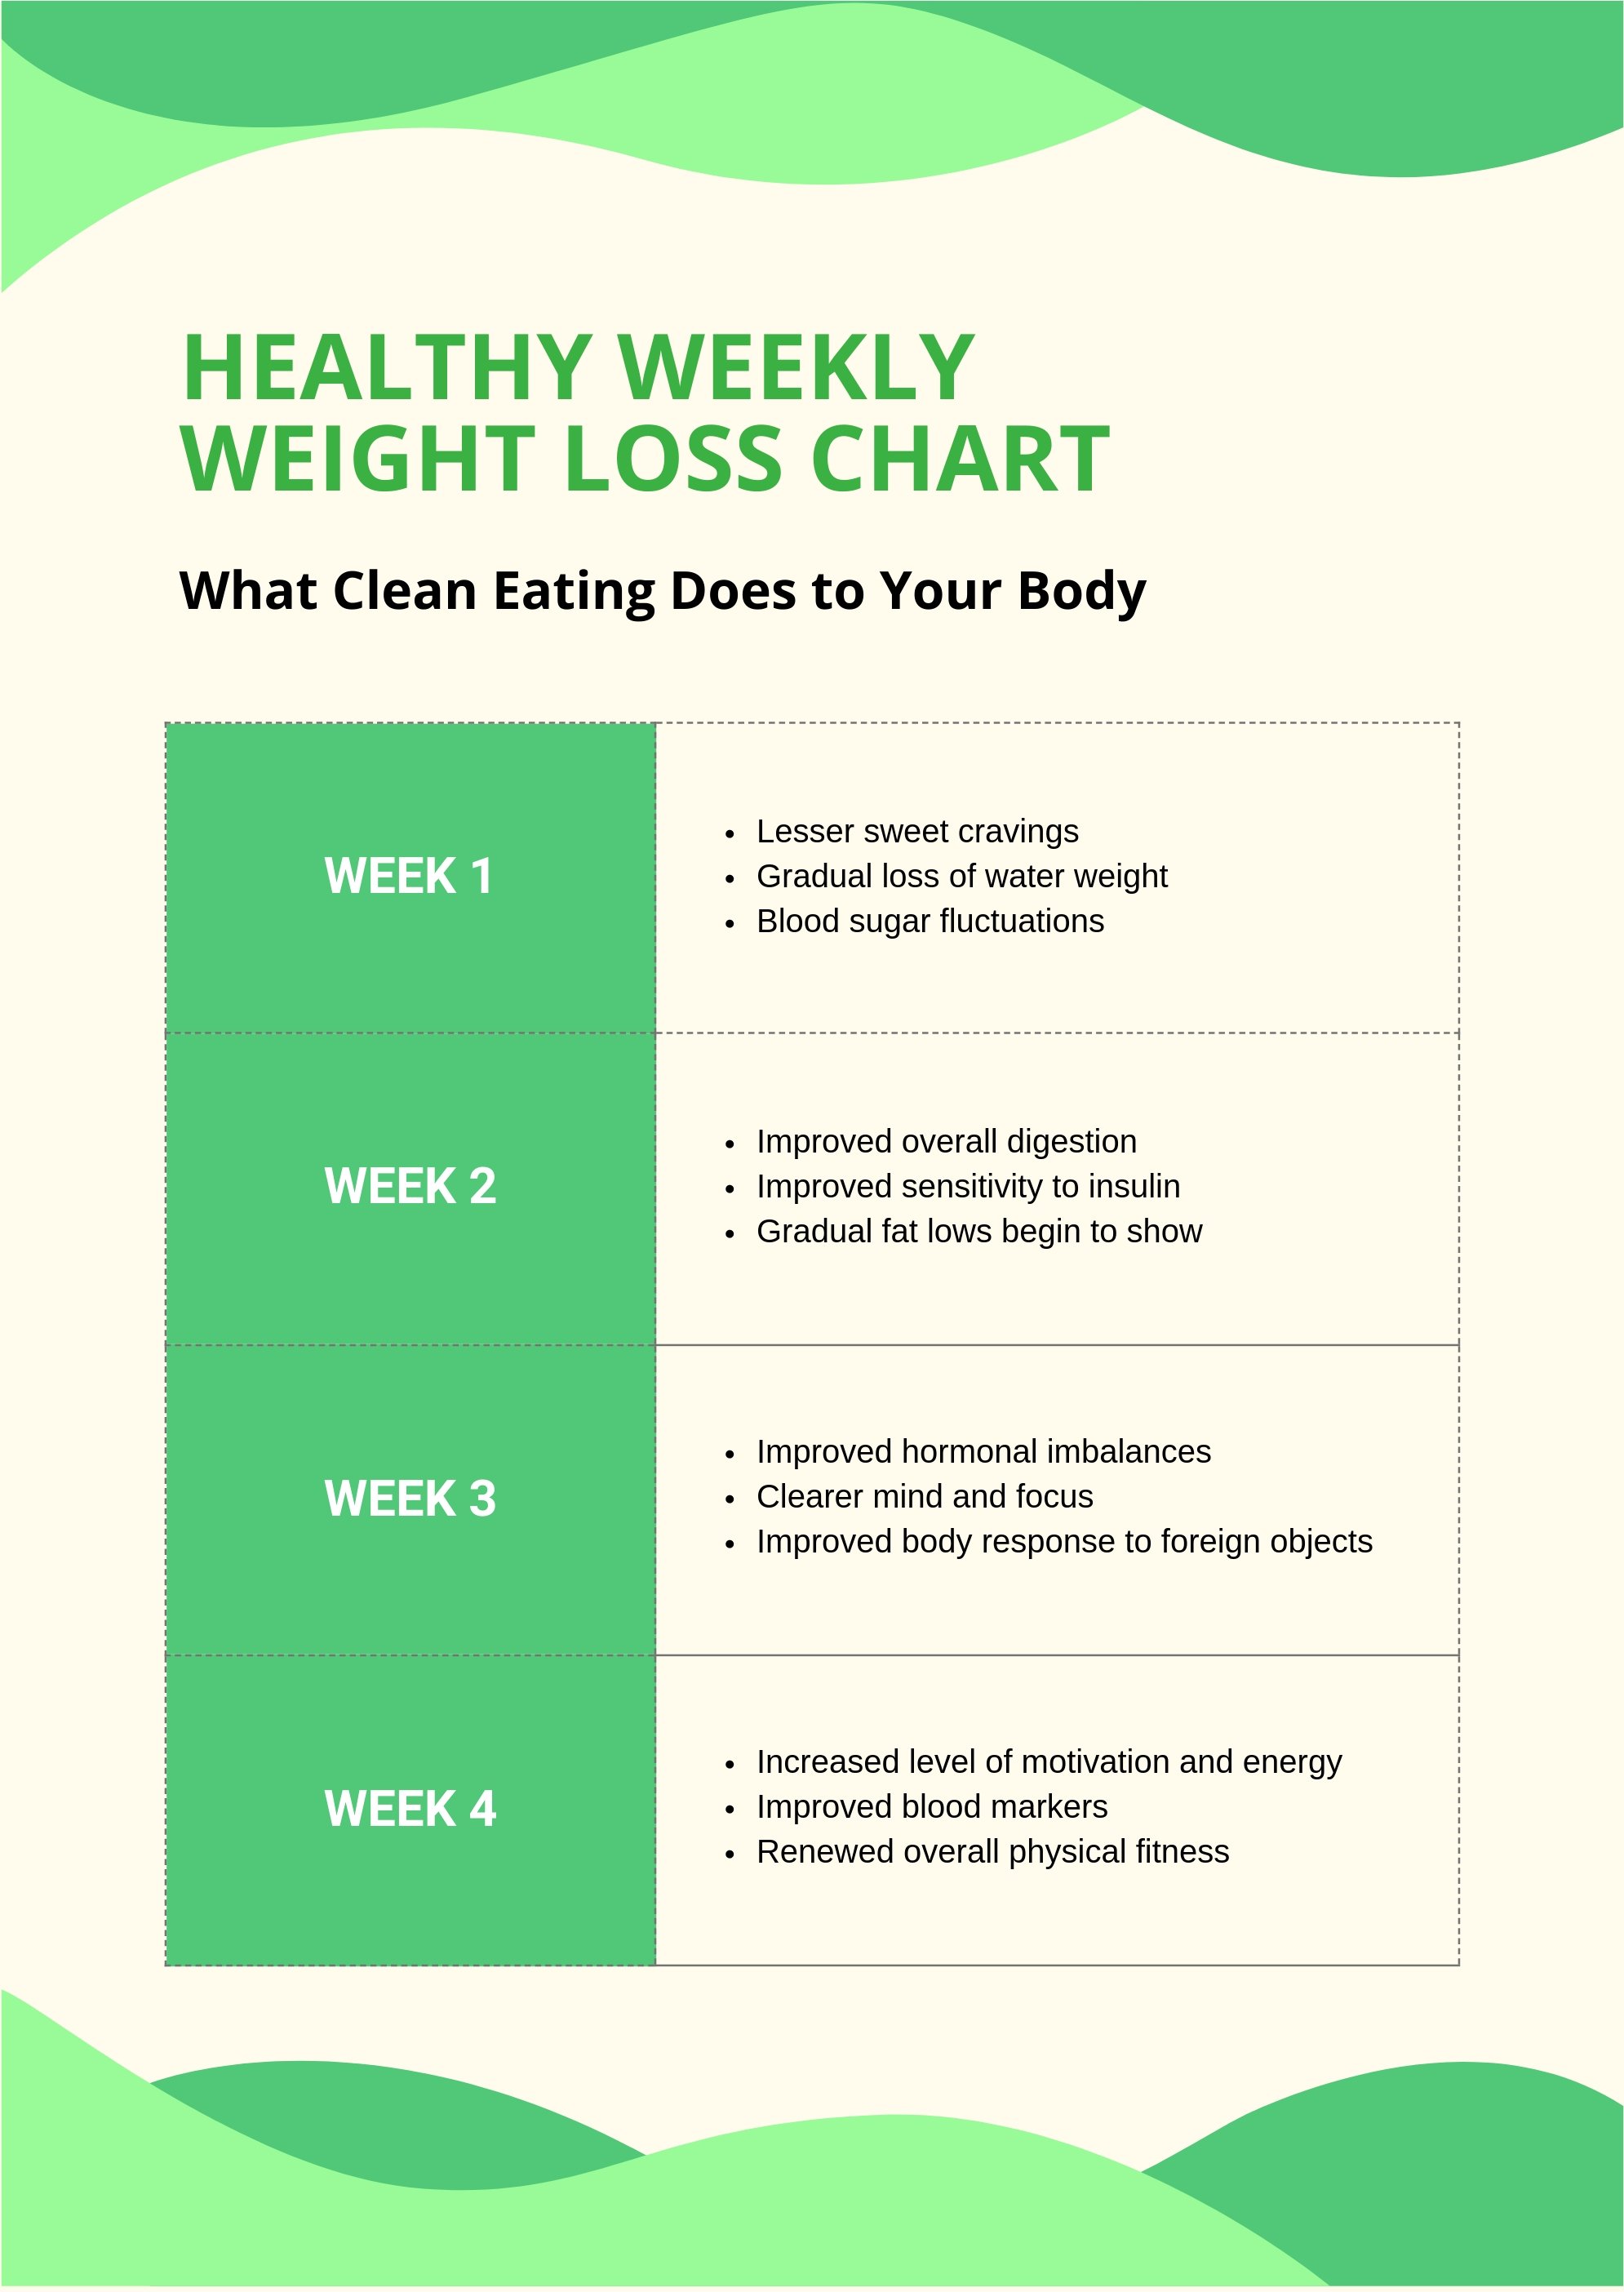 Healthy Weekly Weight Loss Chart in PDF, Illustrator